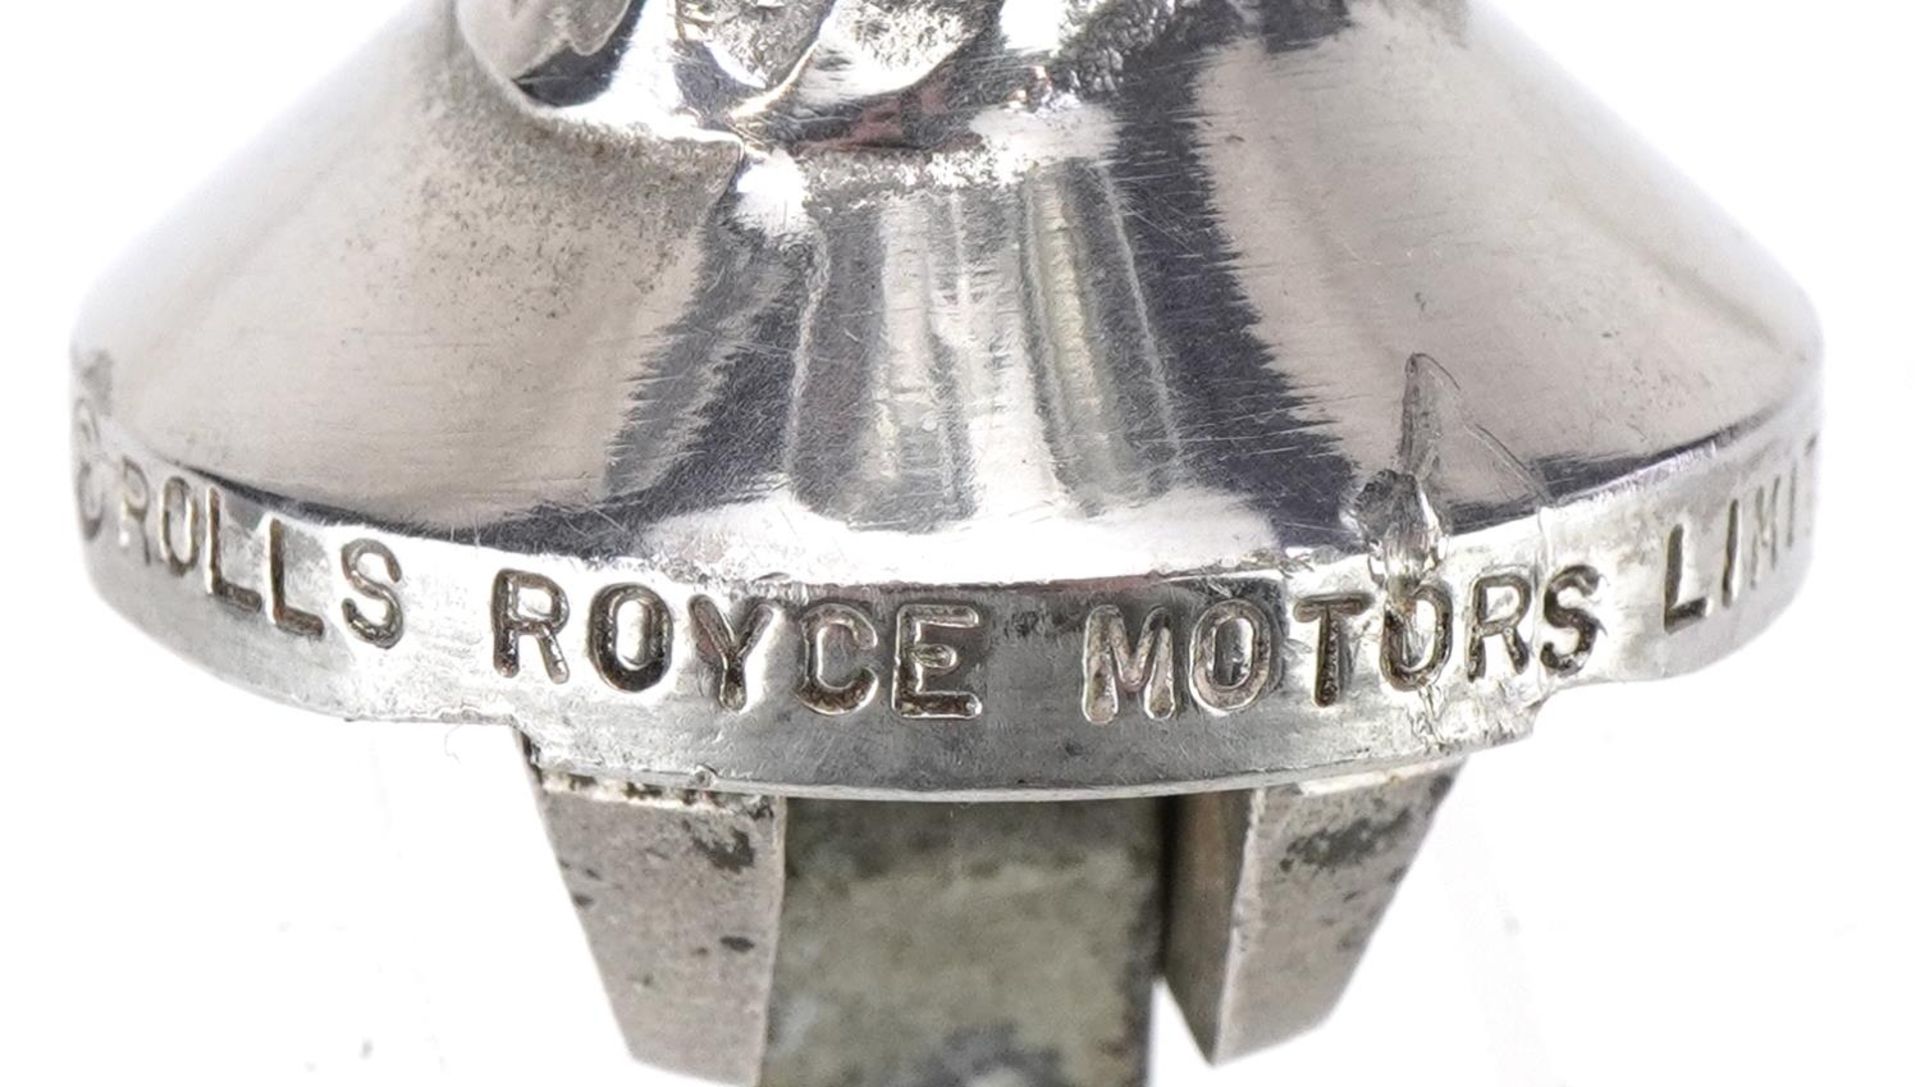 Motoring interest Rolls Royce Motors Limited Spirit of Ecstasy chrome plated car mascot, overall - Image 4 of 5